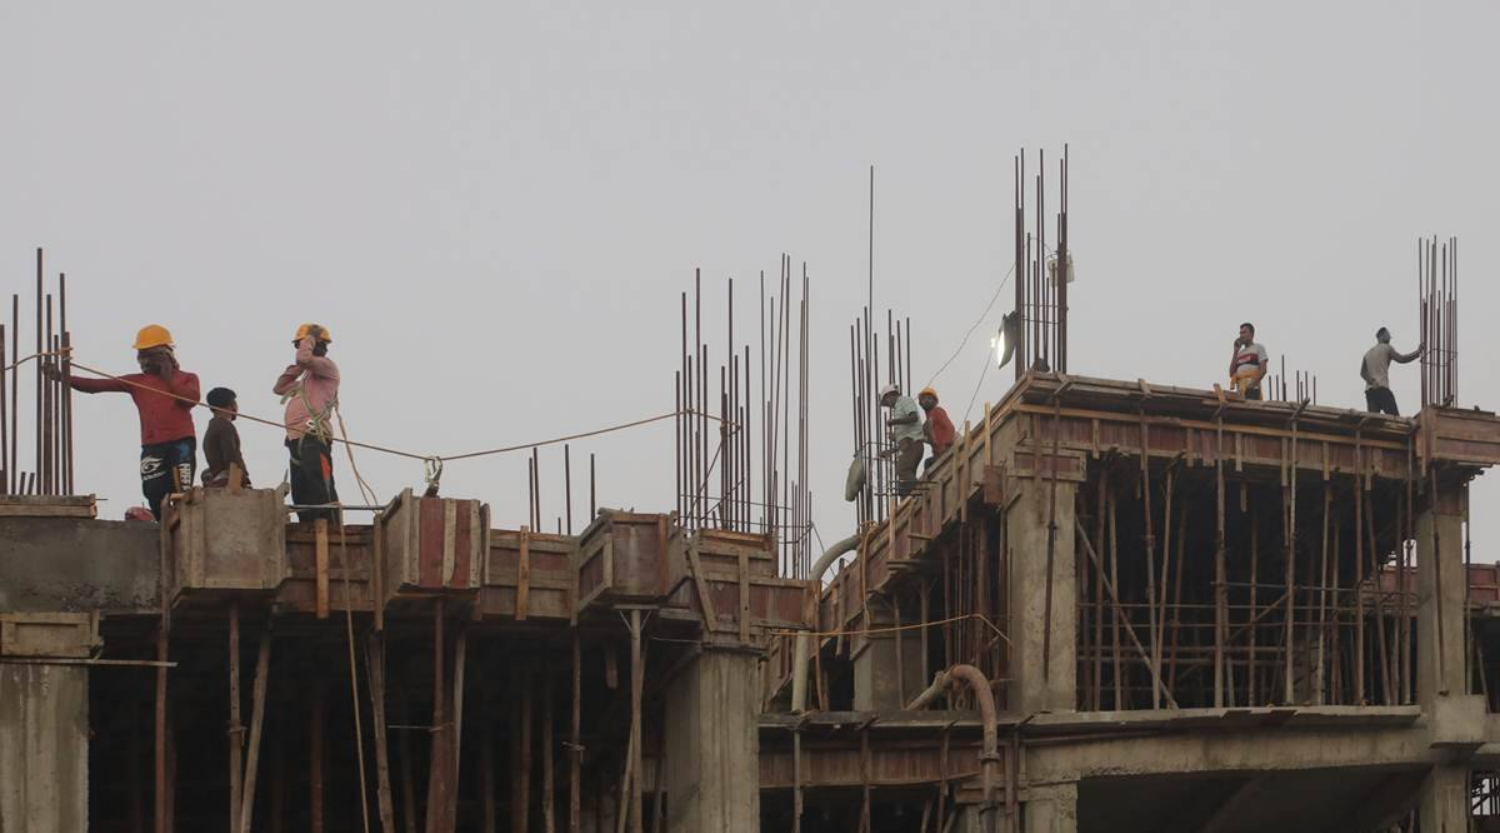 Credai, Naredco expect steel prices to come down after govt’s measures